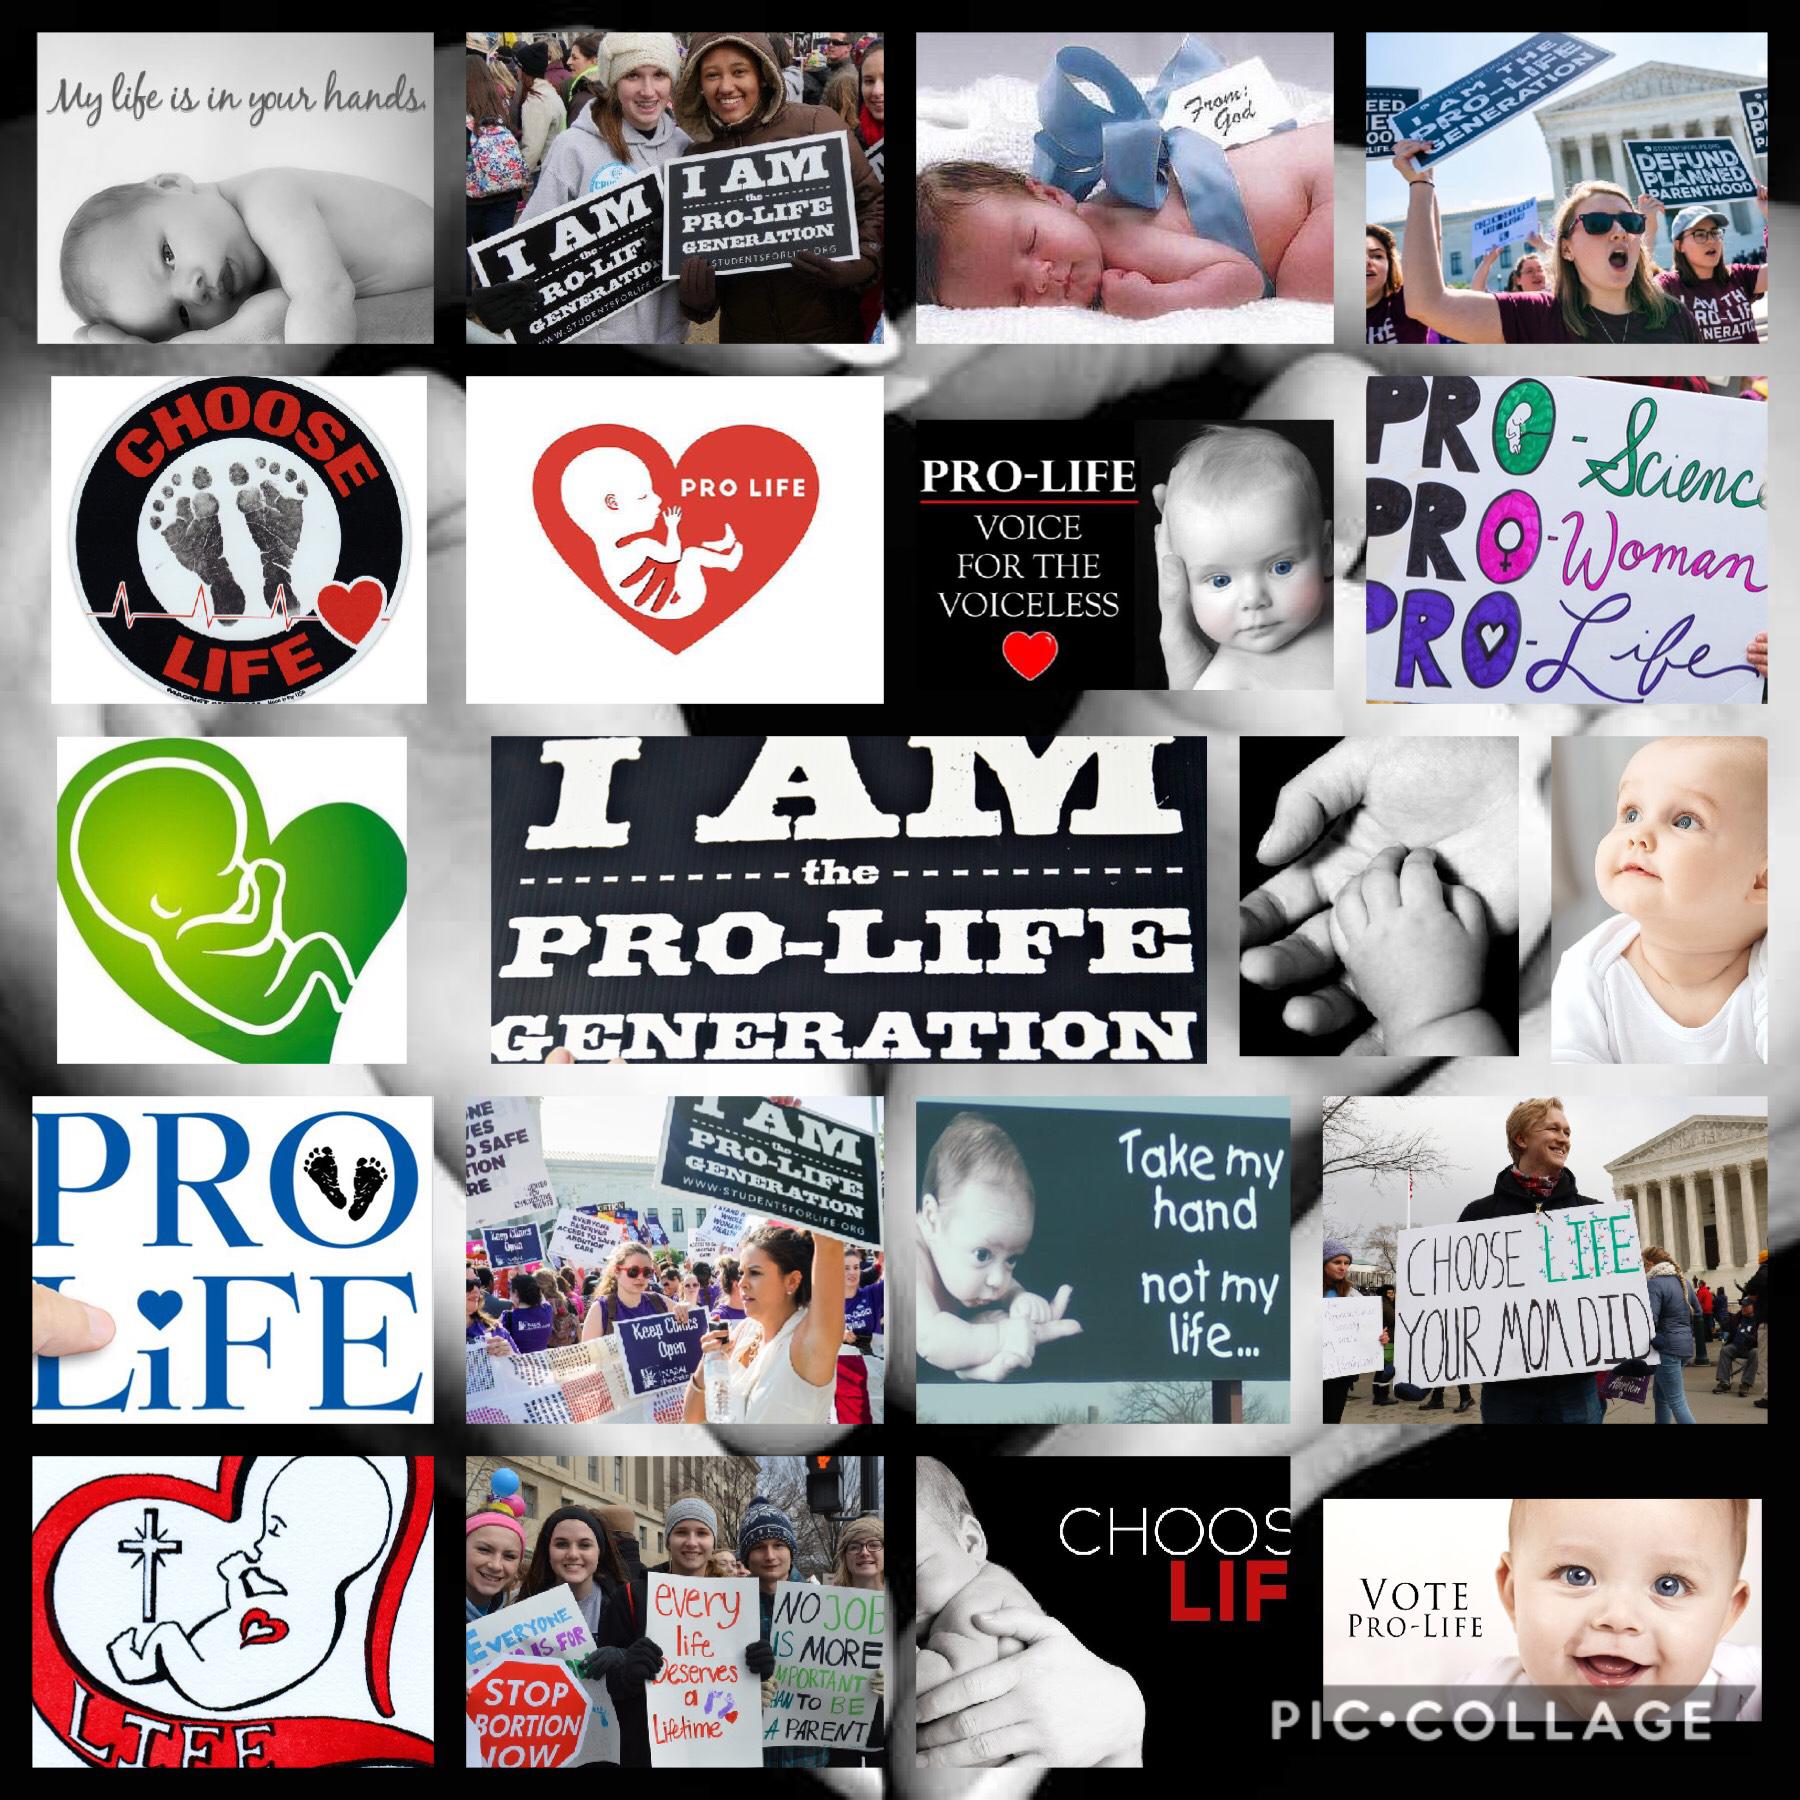 I AM THE PRO-LIFE GENERATION! People take MURDERING innocent babies as nothing, while some of us wish we can have a new baby but we can’t because of a miscarriage or we are sterile! STOP THE KILLING AND START THE SAVING!❤️